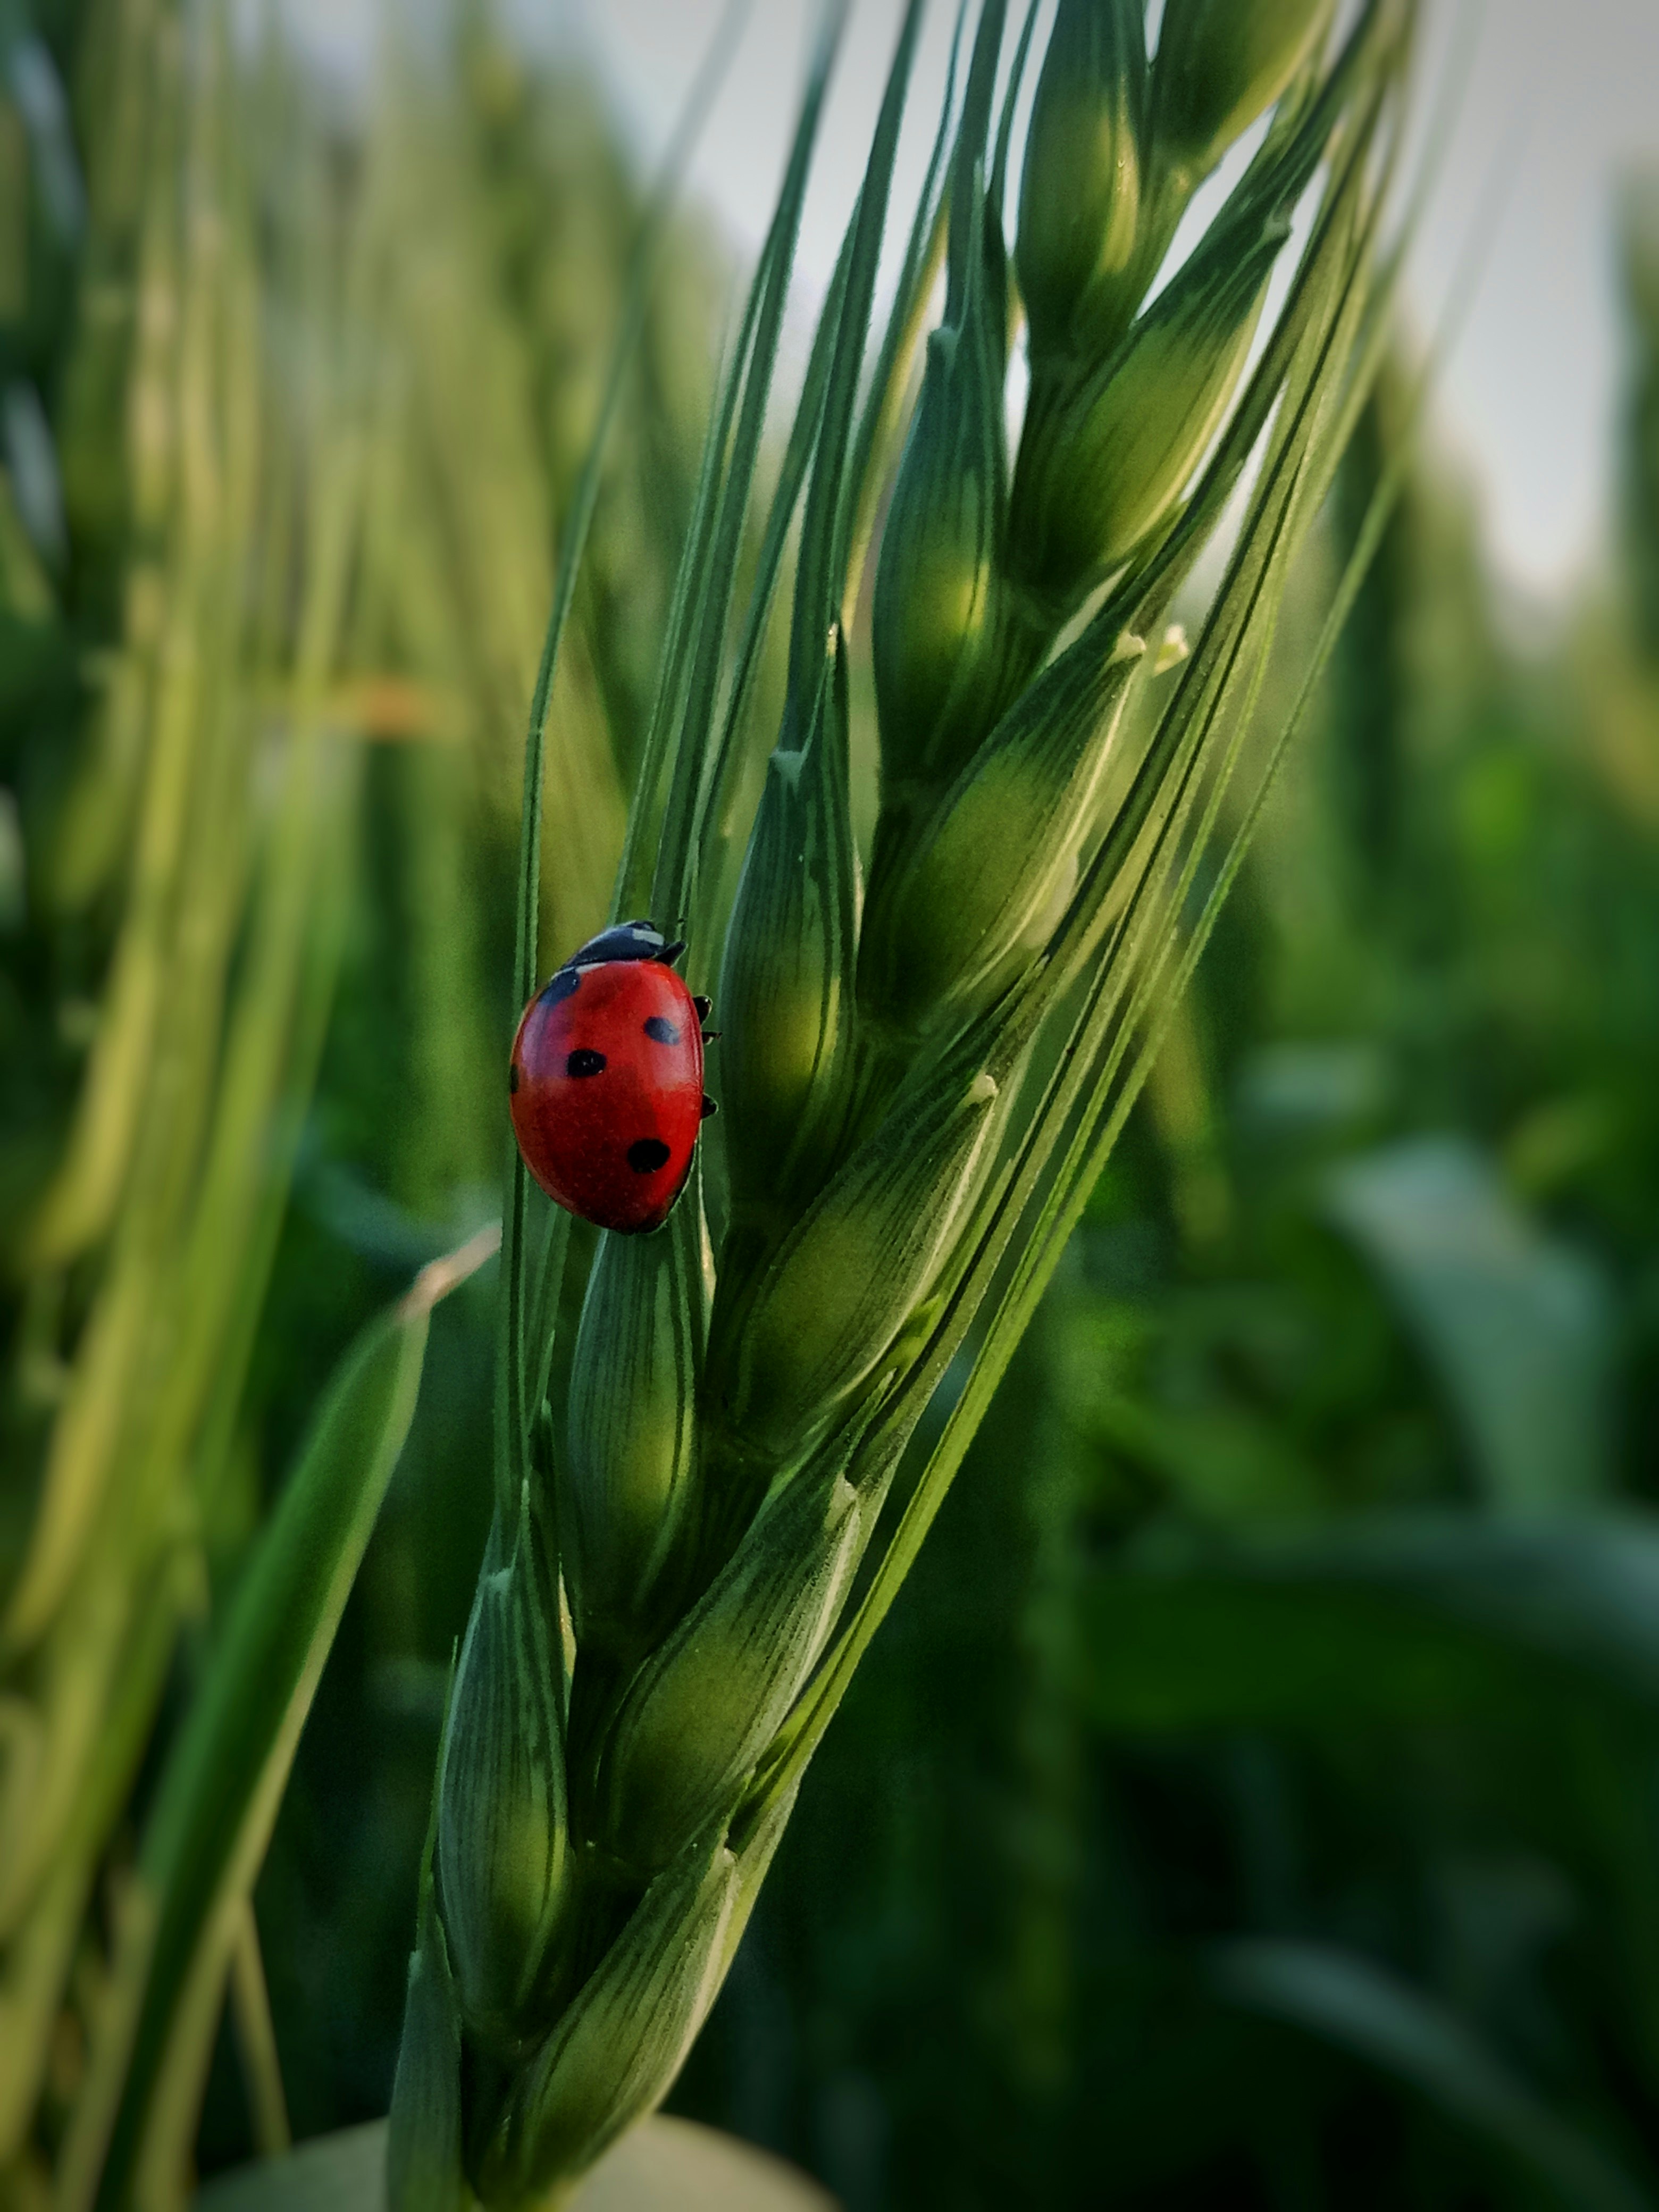 Ladybug 🐞🐞🐞🐞🐞
Check out Instagram: @rafayyansari @chota_admii

 bug,redbug,insect,insects macro,Macro,macro flower,grasshoppers,grassland,grass abstract art,abstract wallpaper,Greenery,greenery forest,green aesthetic,background,Flying,Flies,fall,forest fog,background texture,Black,greek,textured wall,Texture leaf,Leafs,Leaves,leaves wallpaper,Focused,Focus,focus group,focusing,Red,Green,green energy,Fields,Flowers,flowers field,red insect,Home flies,Red bug,Bugs,bugs life,Busy,Wheat bug,wheat farm,wheat harvest,wheat crop, worlds, animals, portraits, quotes, poetry,botany, rafayyansari,